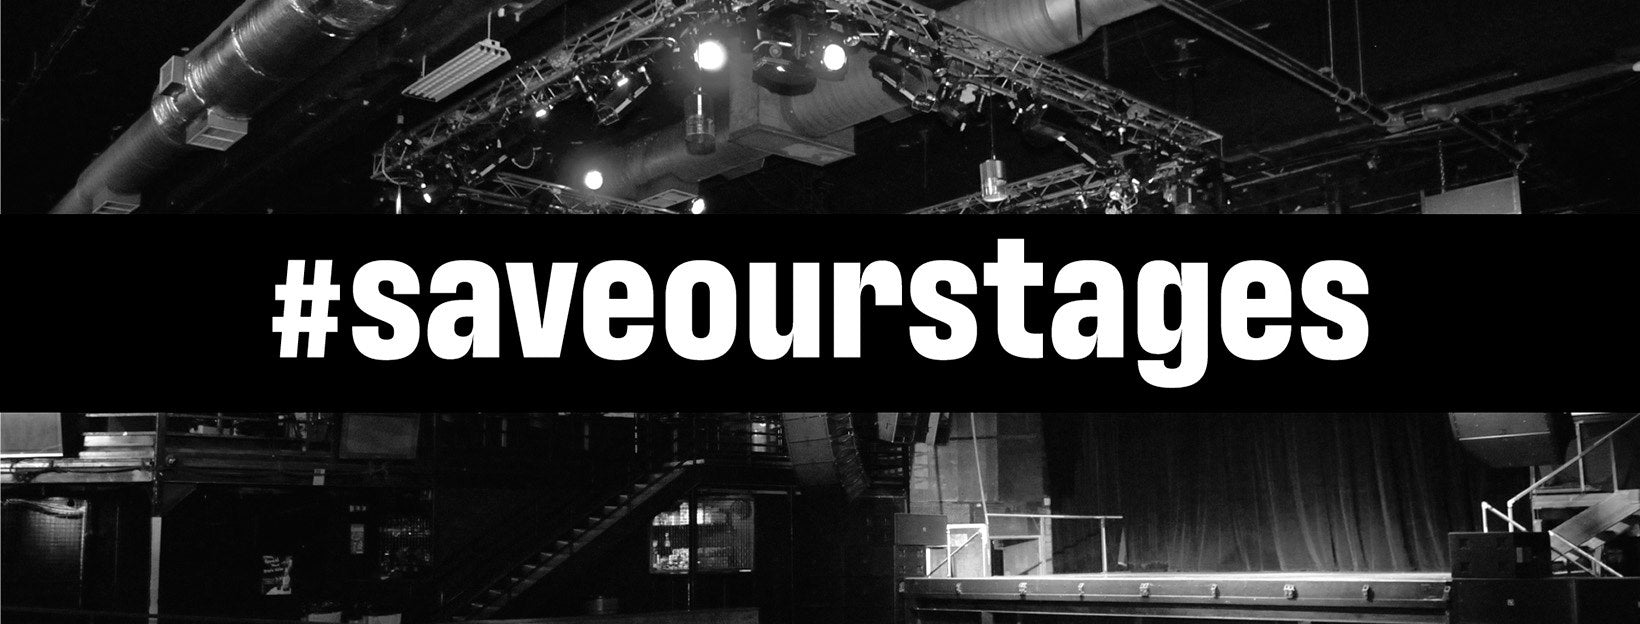 #SaveOurStages - Support the National Independent Venue Association